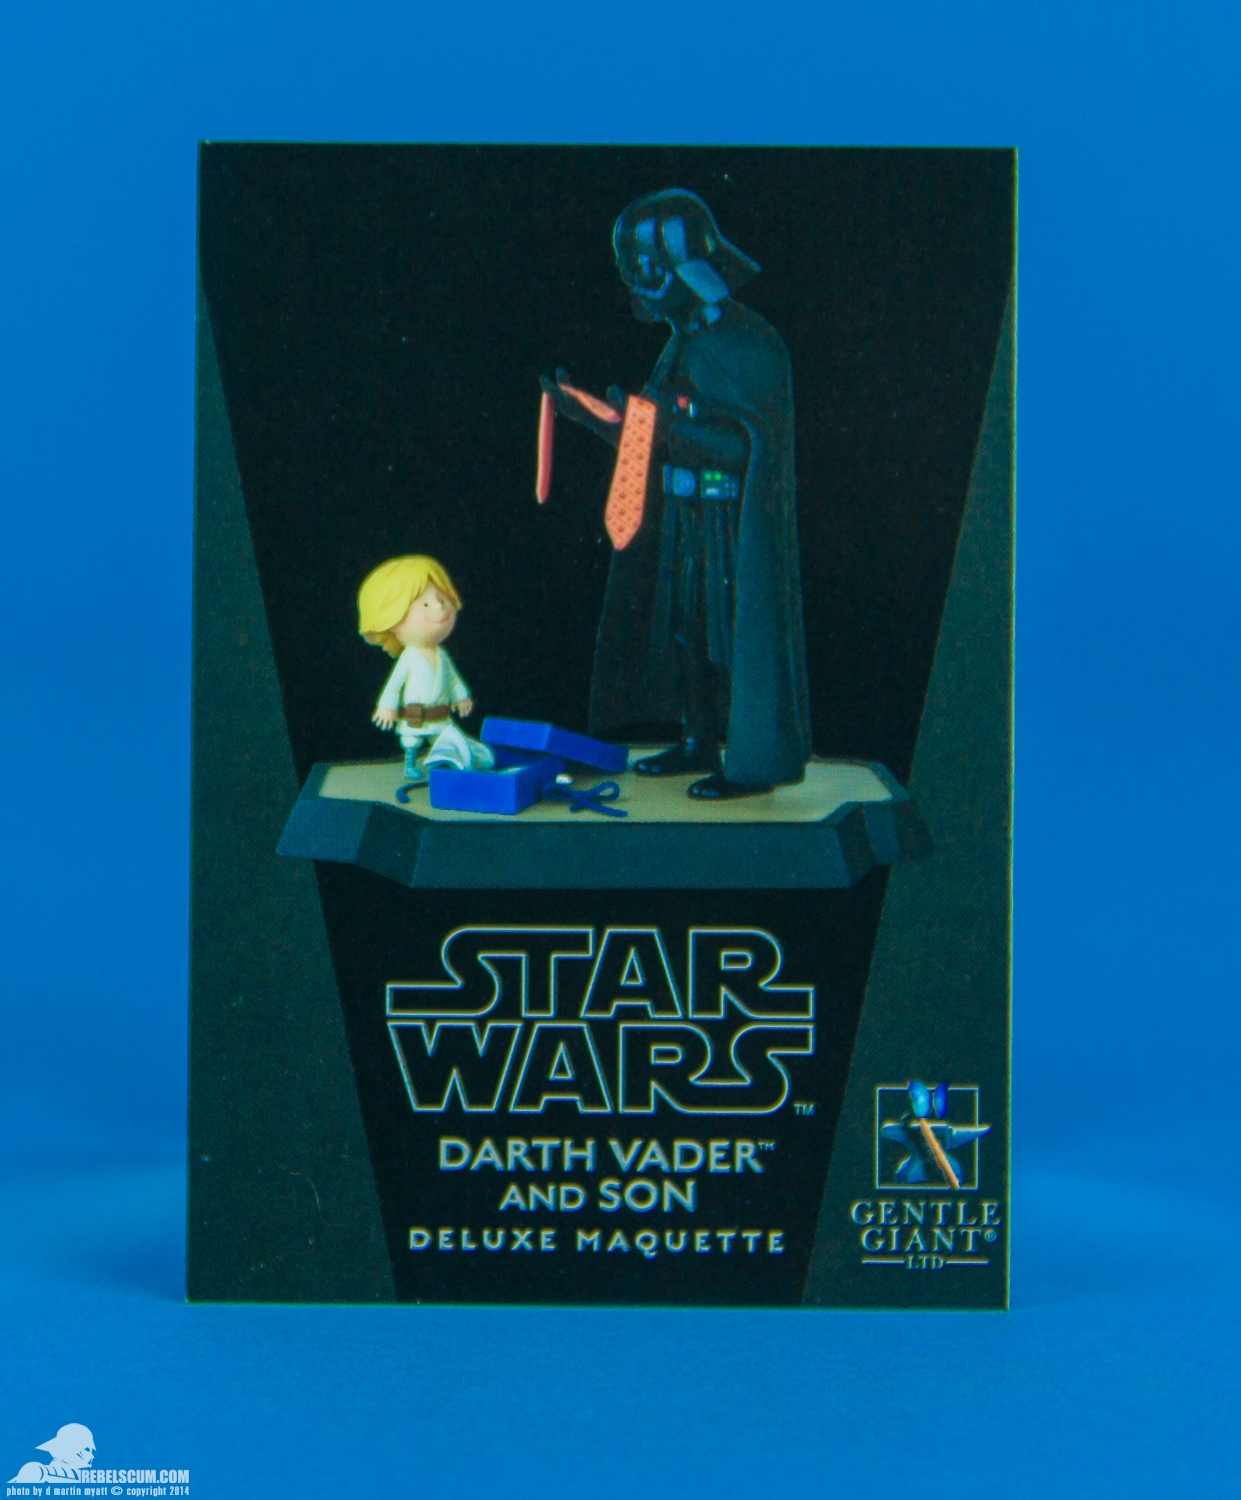 Darth-Vader-And-Son-Deluxe-Maquette-Gentle-Giant-Ltd-012.jpg